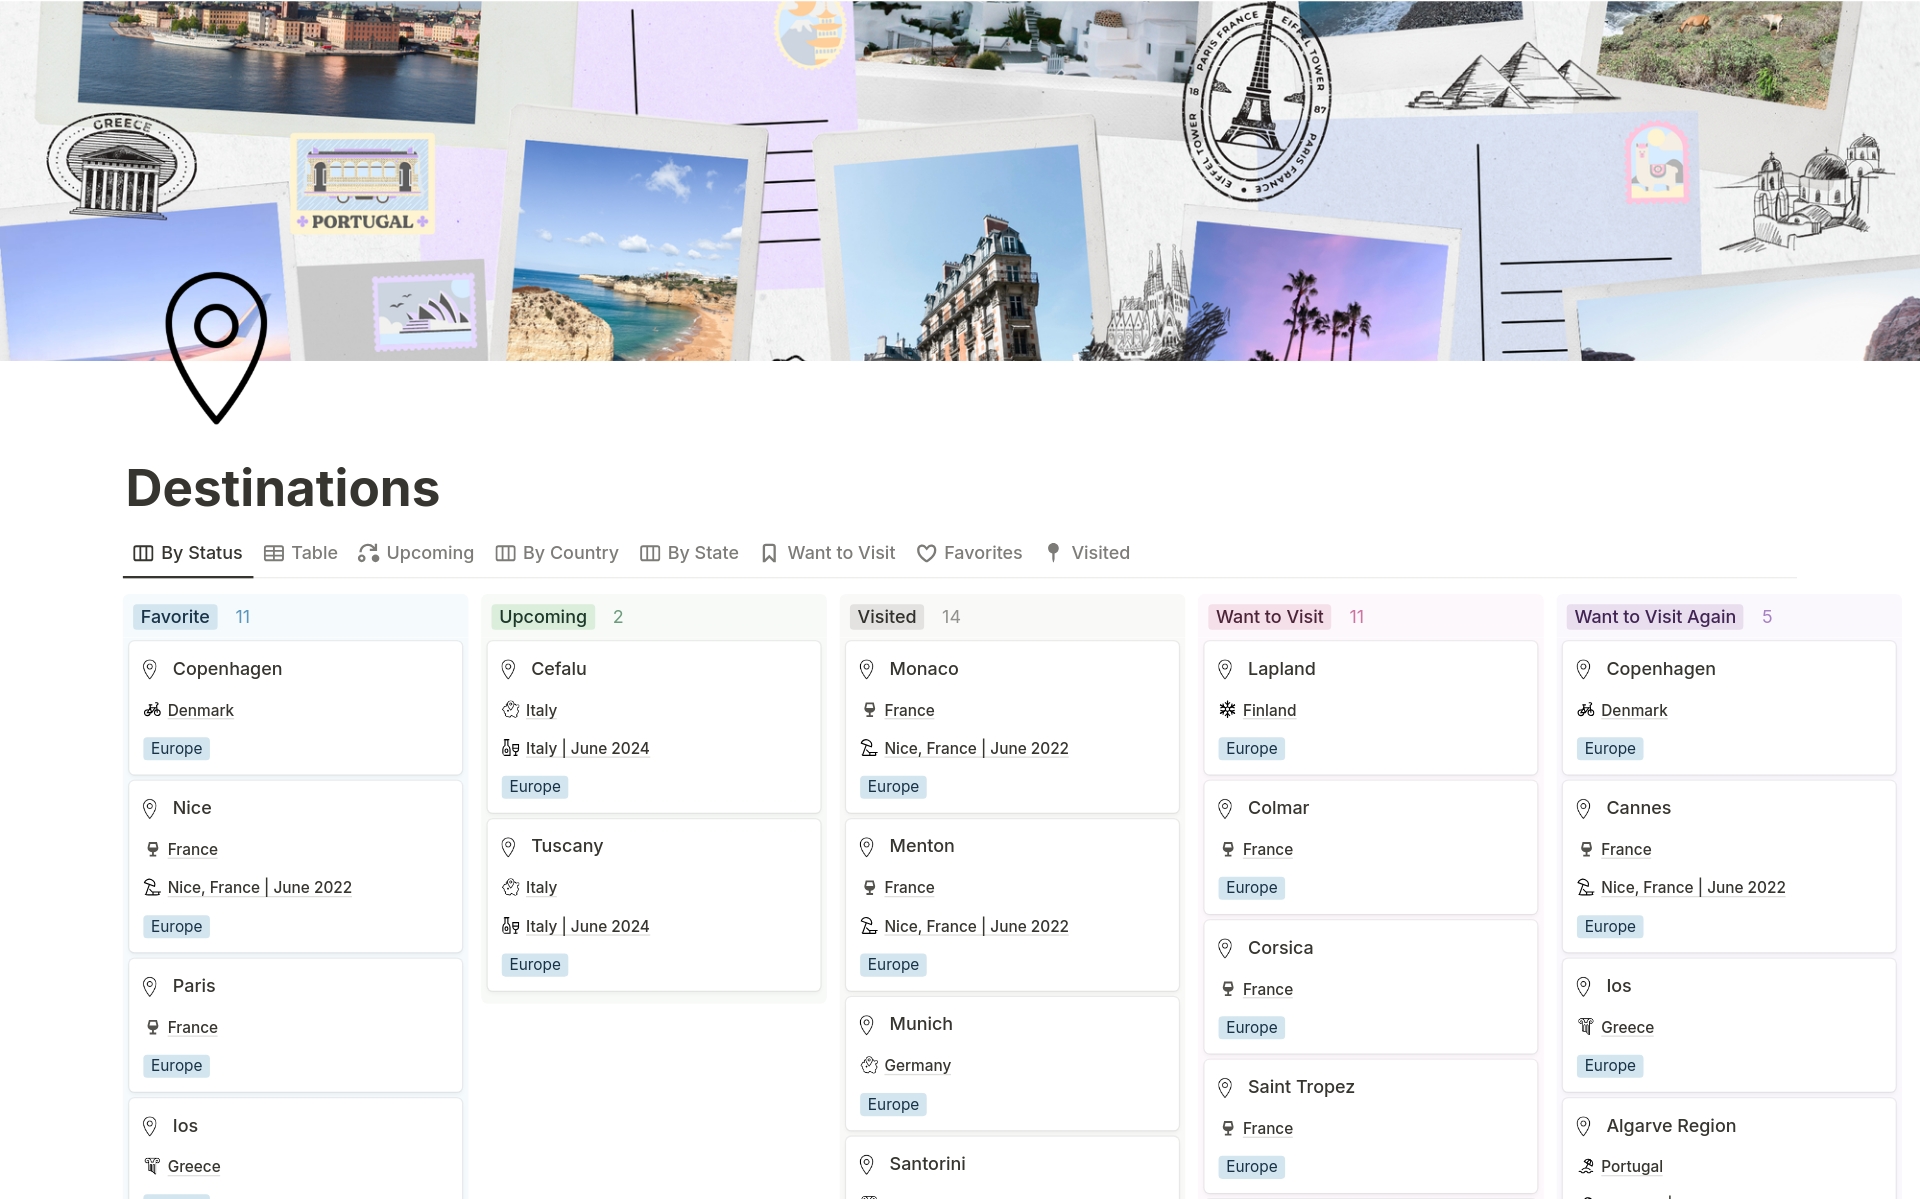 All-in-one travel planner that provides a way to completely organize everything you want for travel planning. Custom trip itinerary, travel journal to document everything, save future destination ideas, packing list, bucket list, and more 😊
